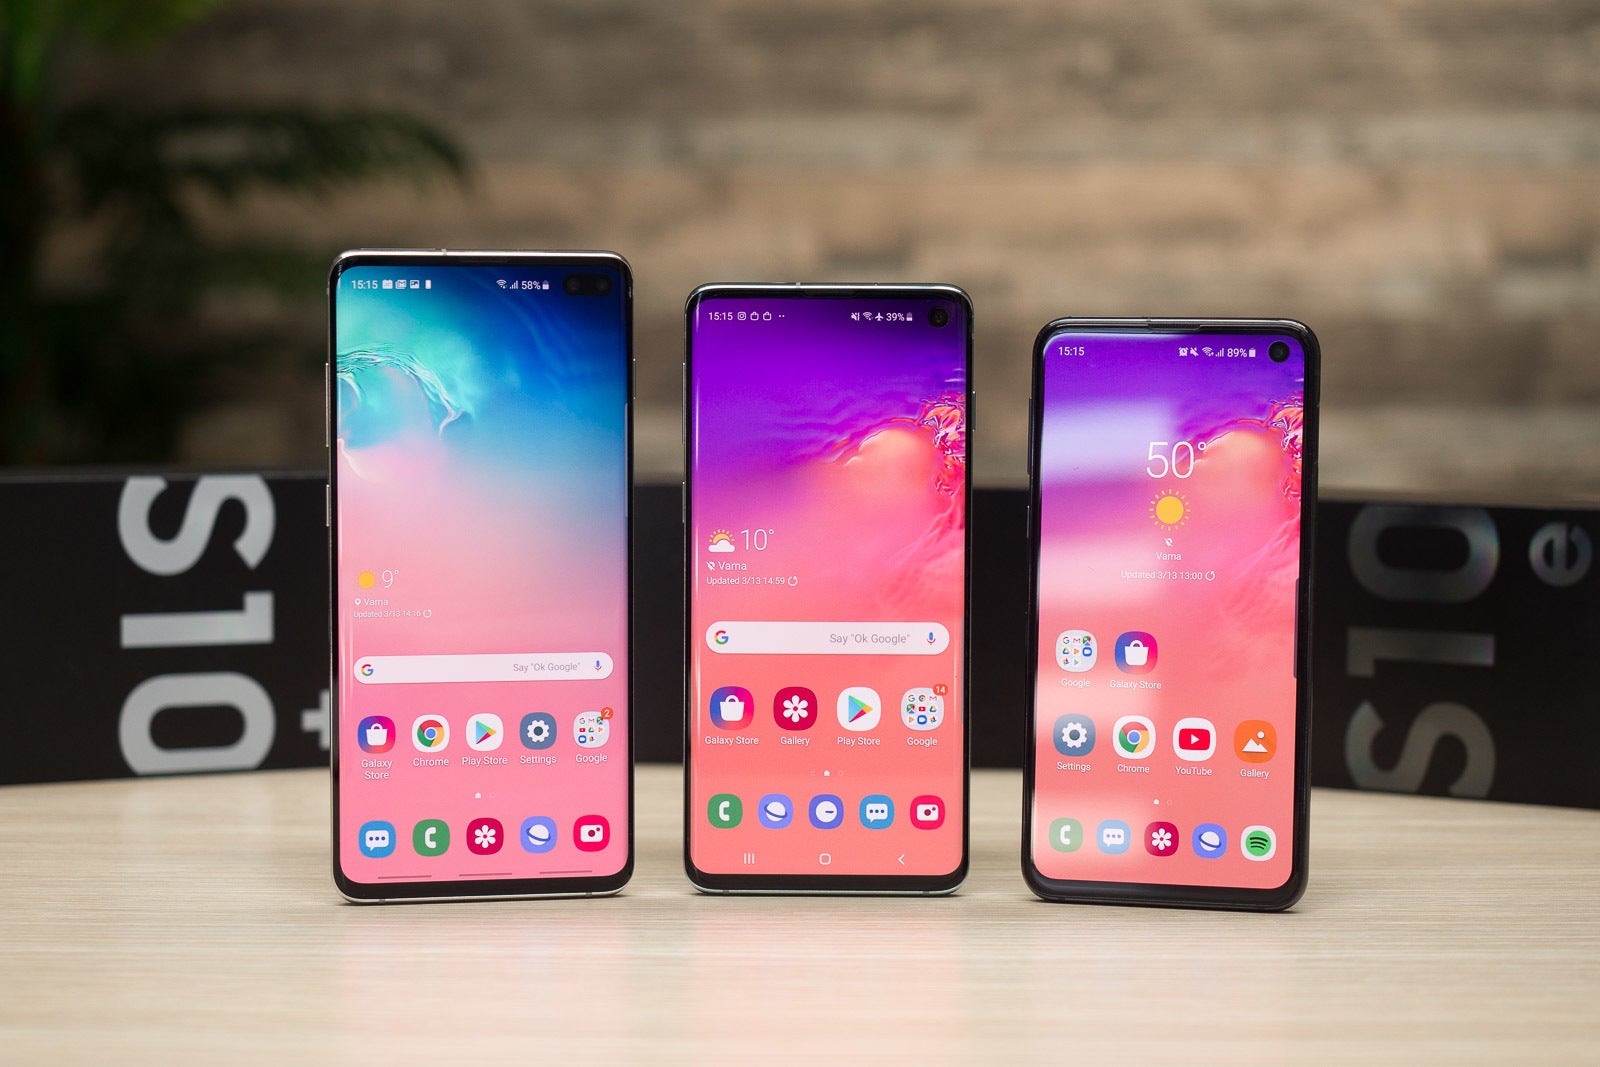 Most popular on the right and least popular on the left - Samsung&#039;s Galaxy S10 has outsold the Galaxy S9 by a significant margin